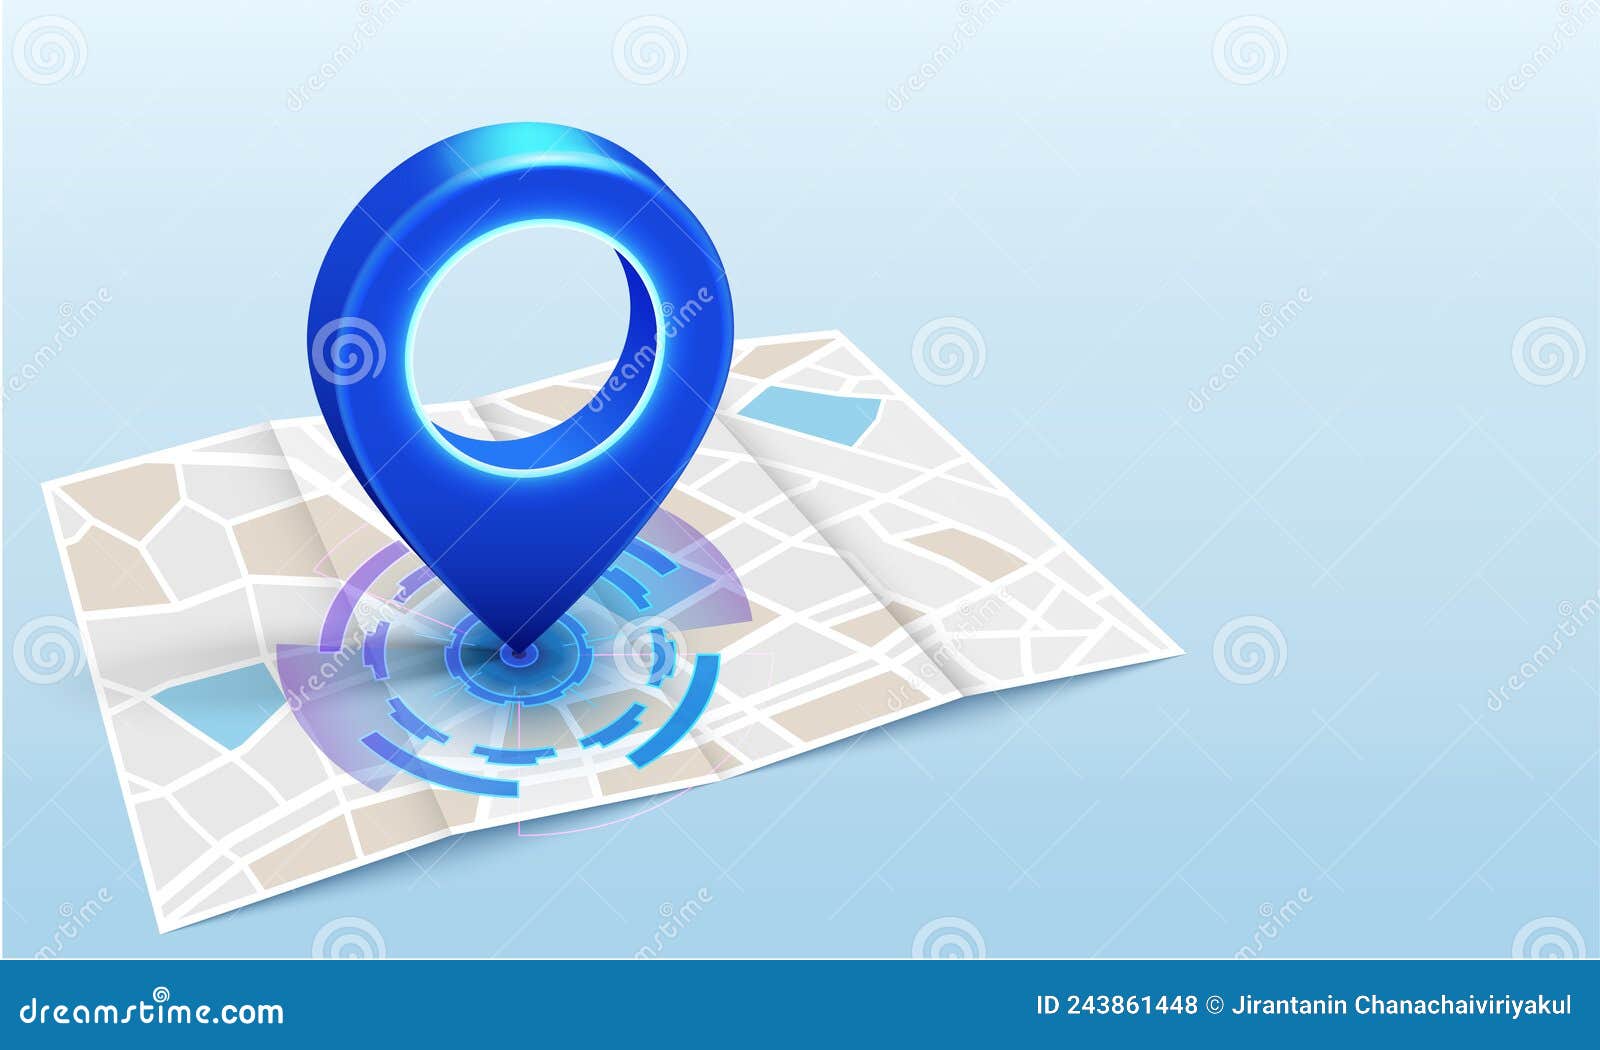 gps pin blue color drop in paper map